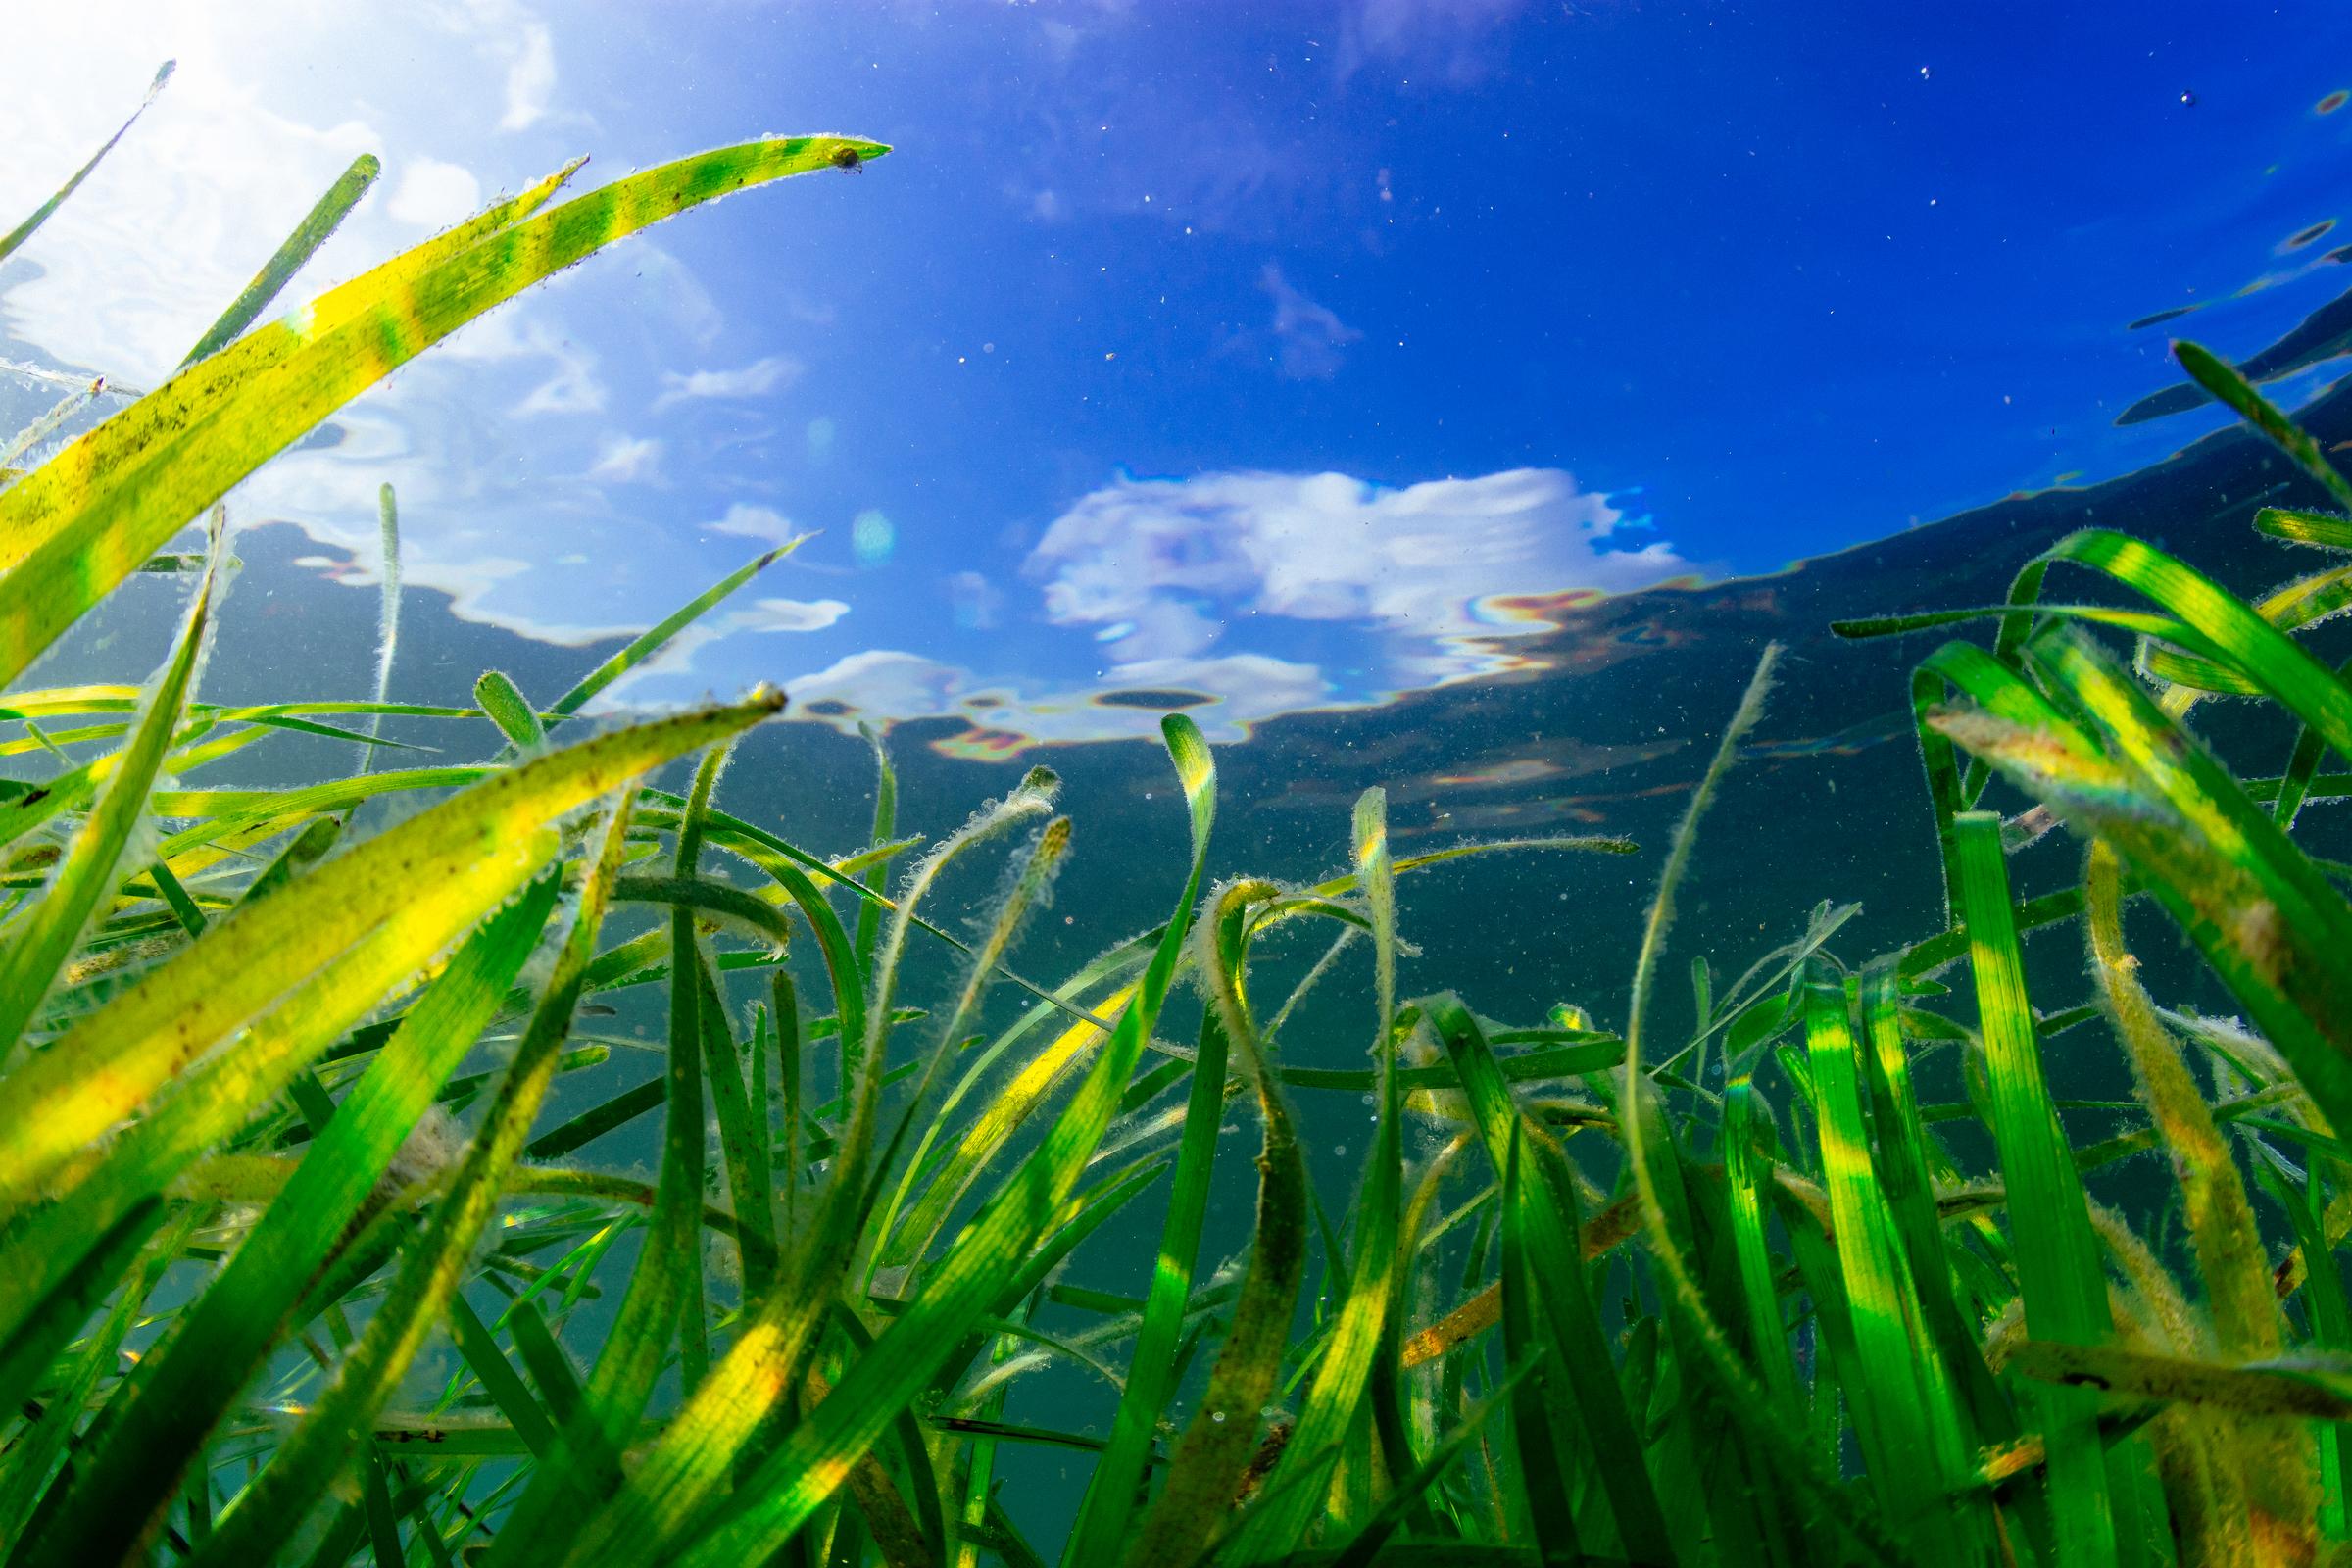 Seagrass is a flowering marine plant that captures carbon from the atmosphere up to 35 times faster than tropical rainforests, making it a key weapon in the battle against climate change. It often grows in large underwater meadows, which absorb carbon dioxide and release oxygen.